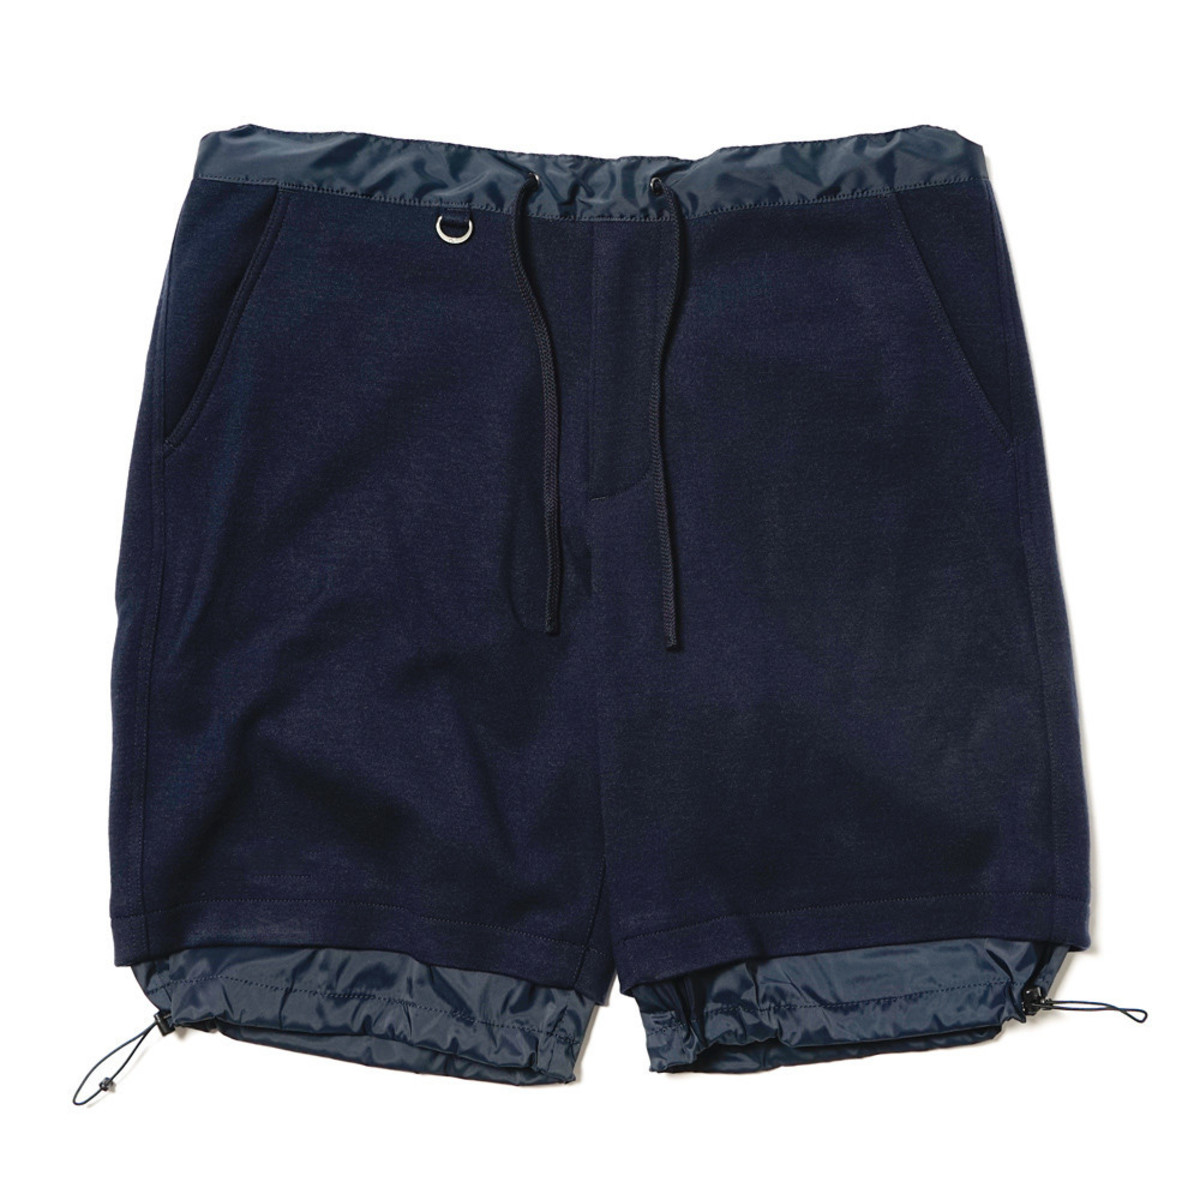 Shorts That Save You The Hassle Of Wearing Two Pairs Of Shorts | Complex